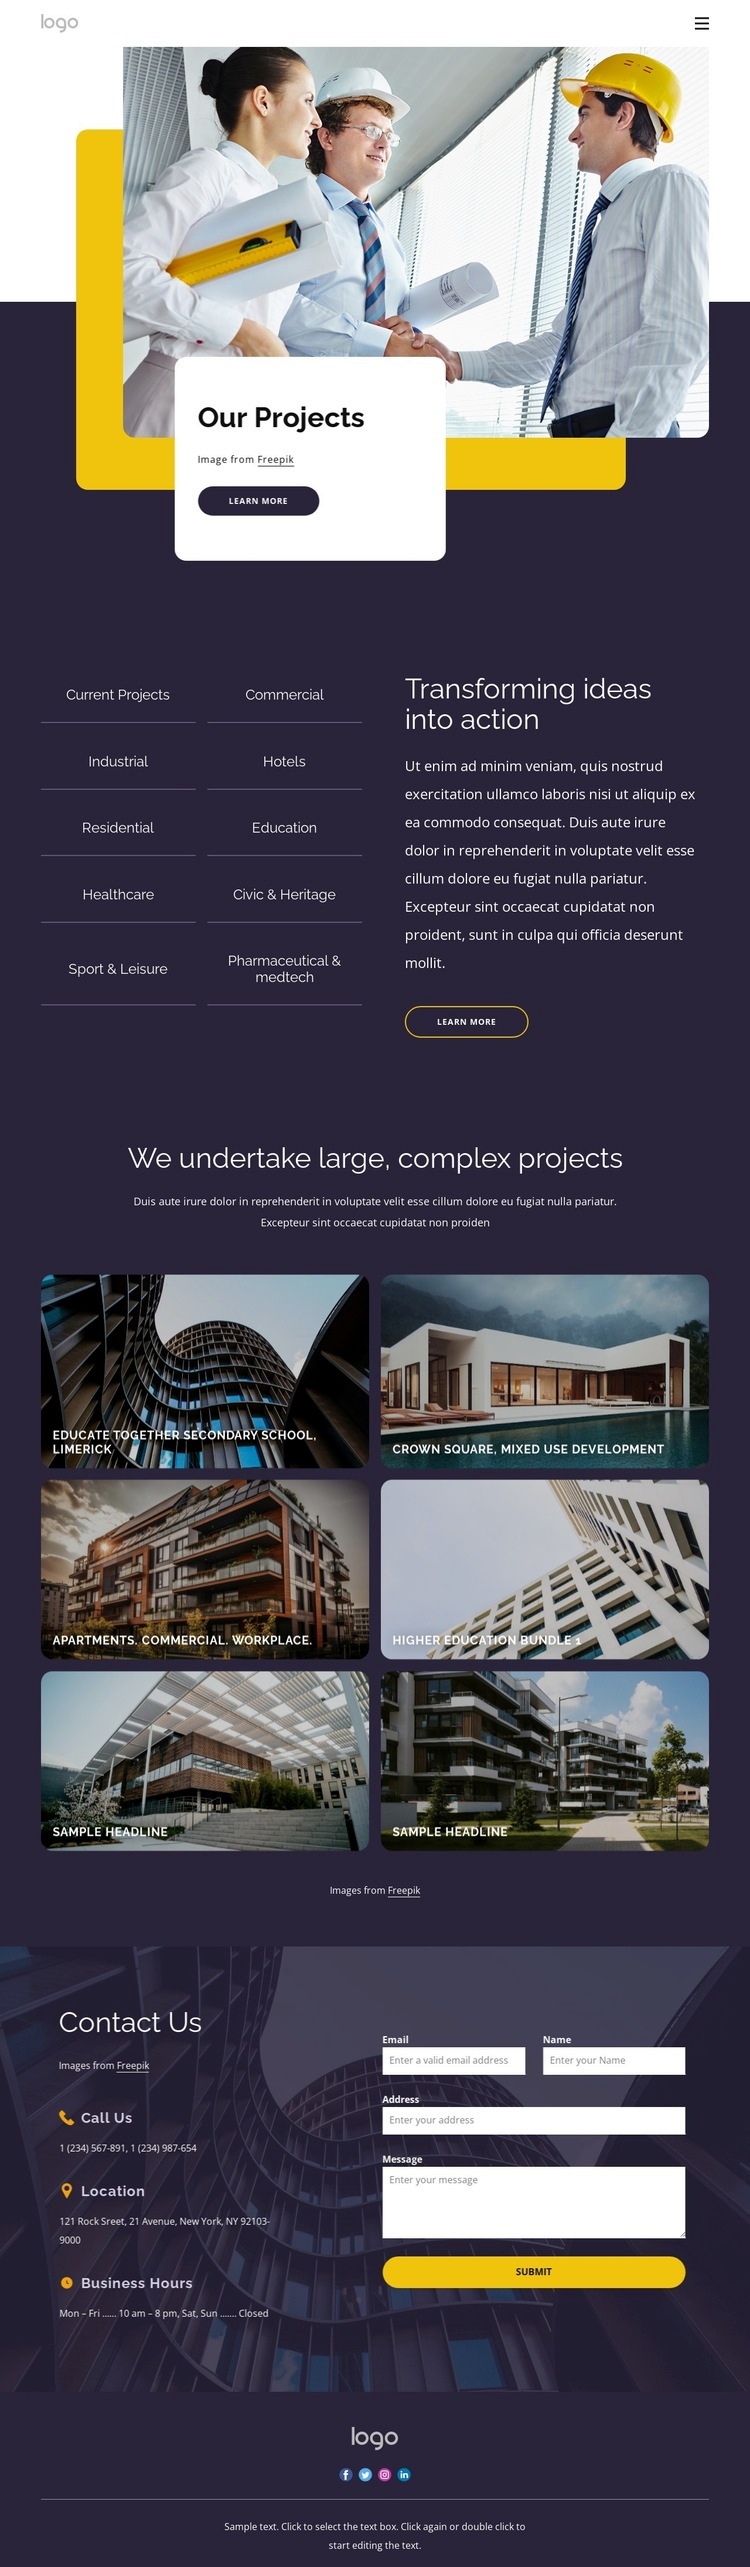 Building and construction projects Homepage Design